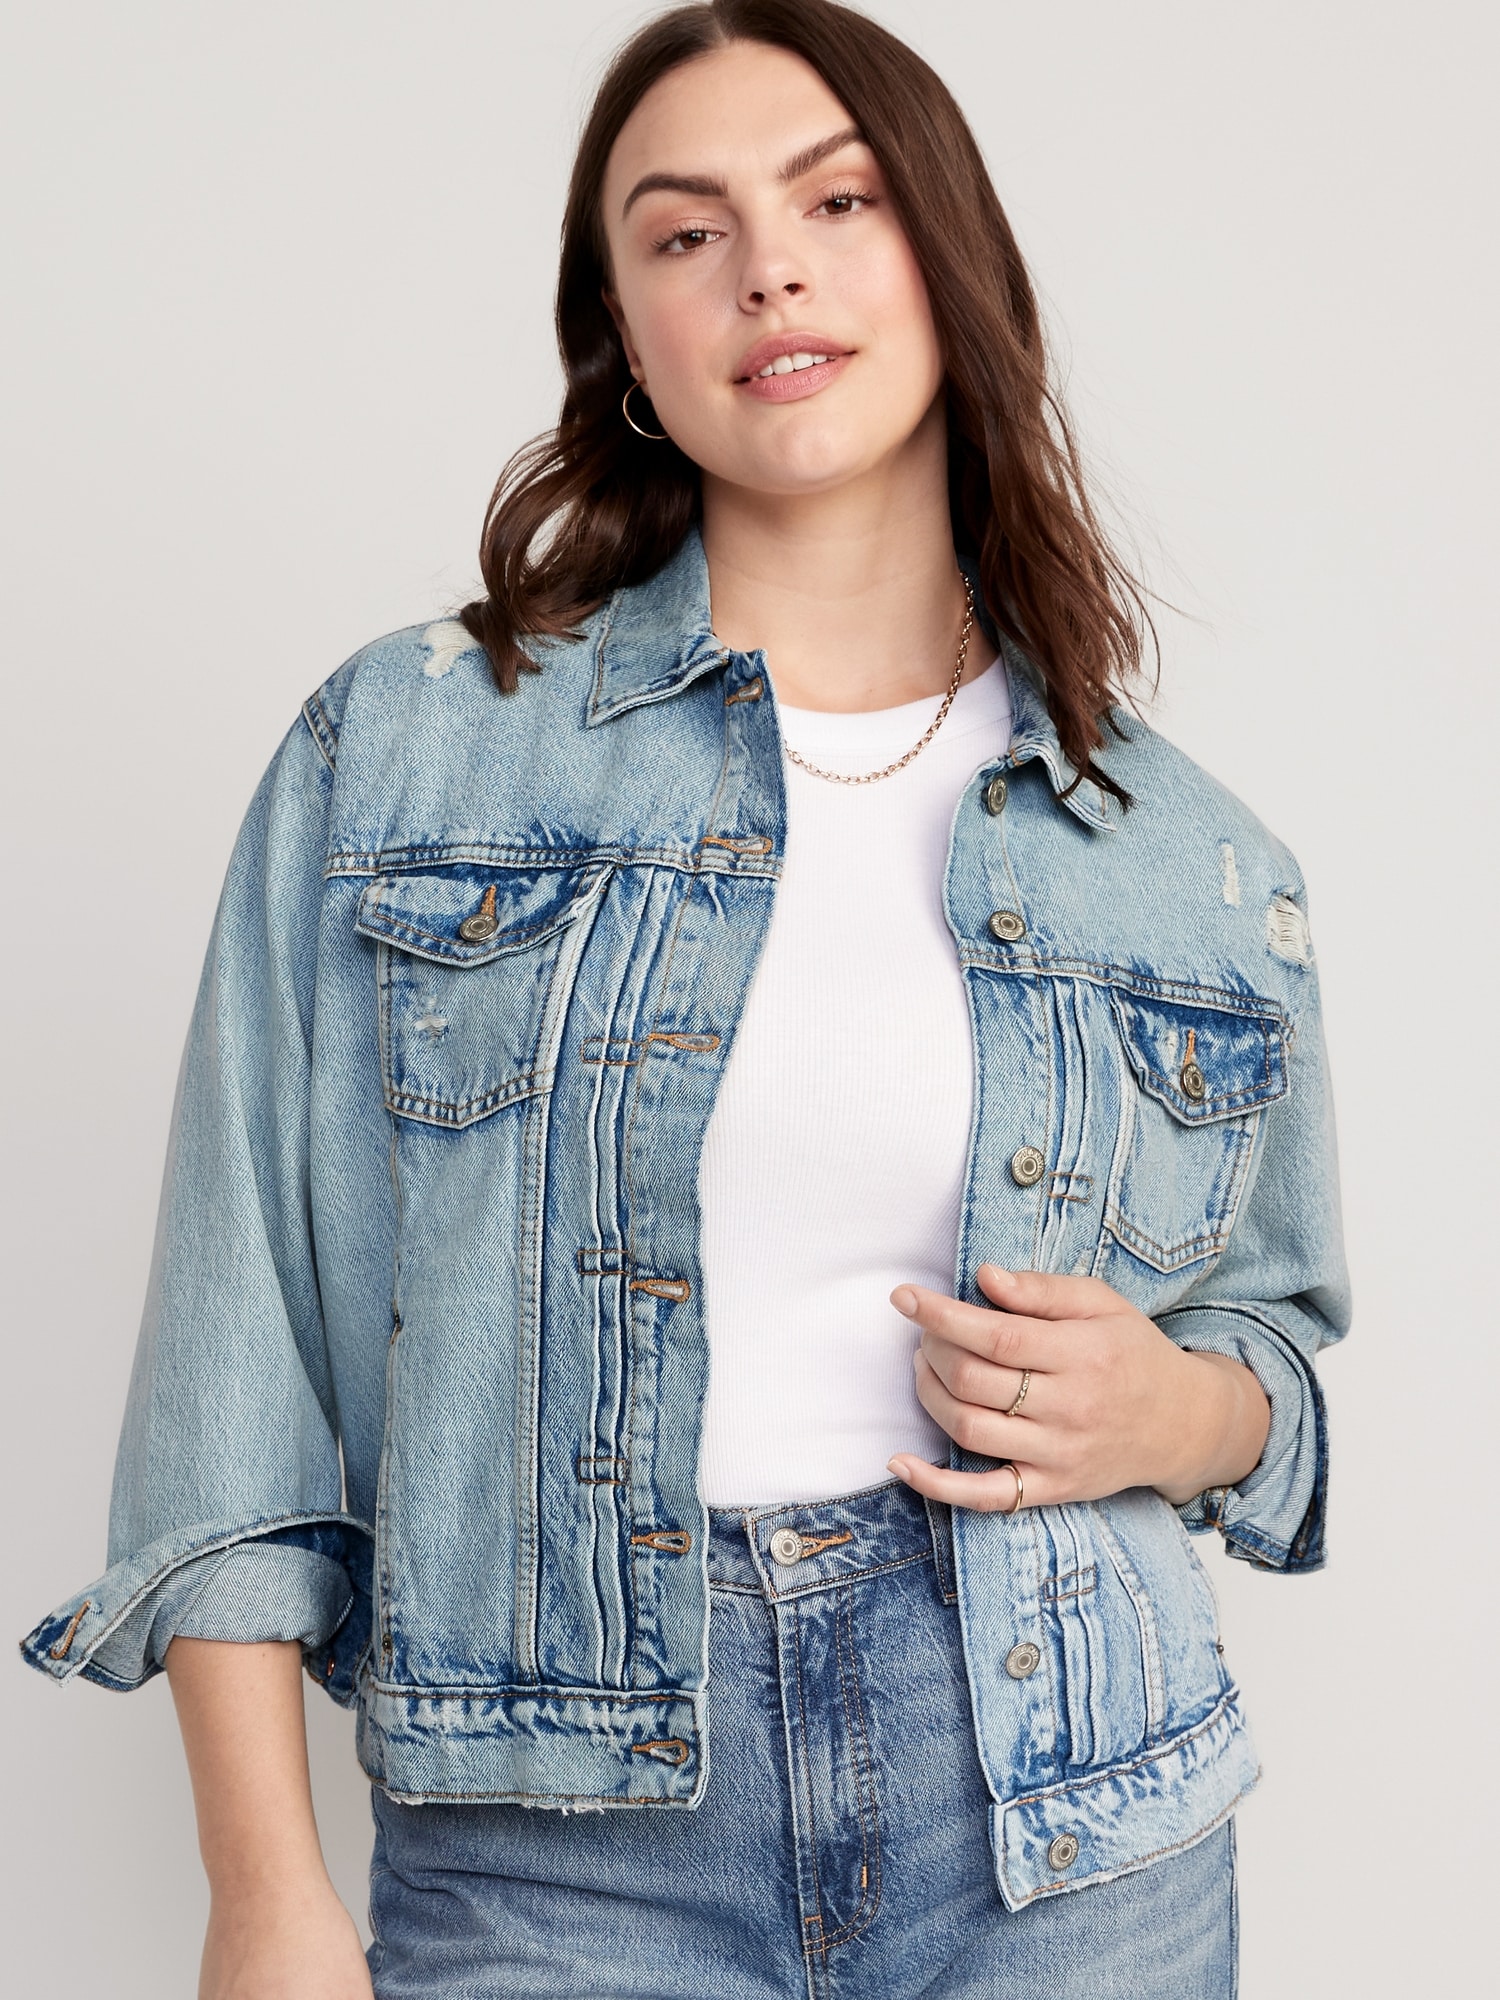 Classic Jean Jacket for Women | Old Navy